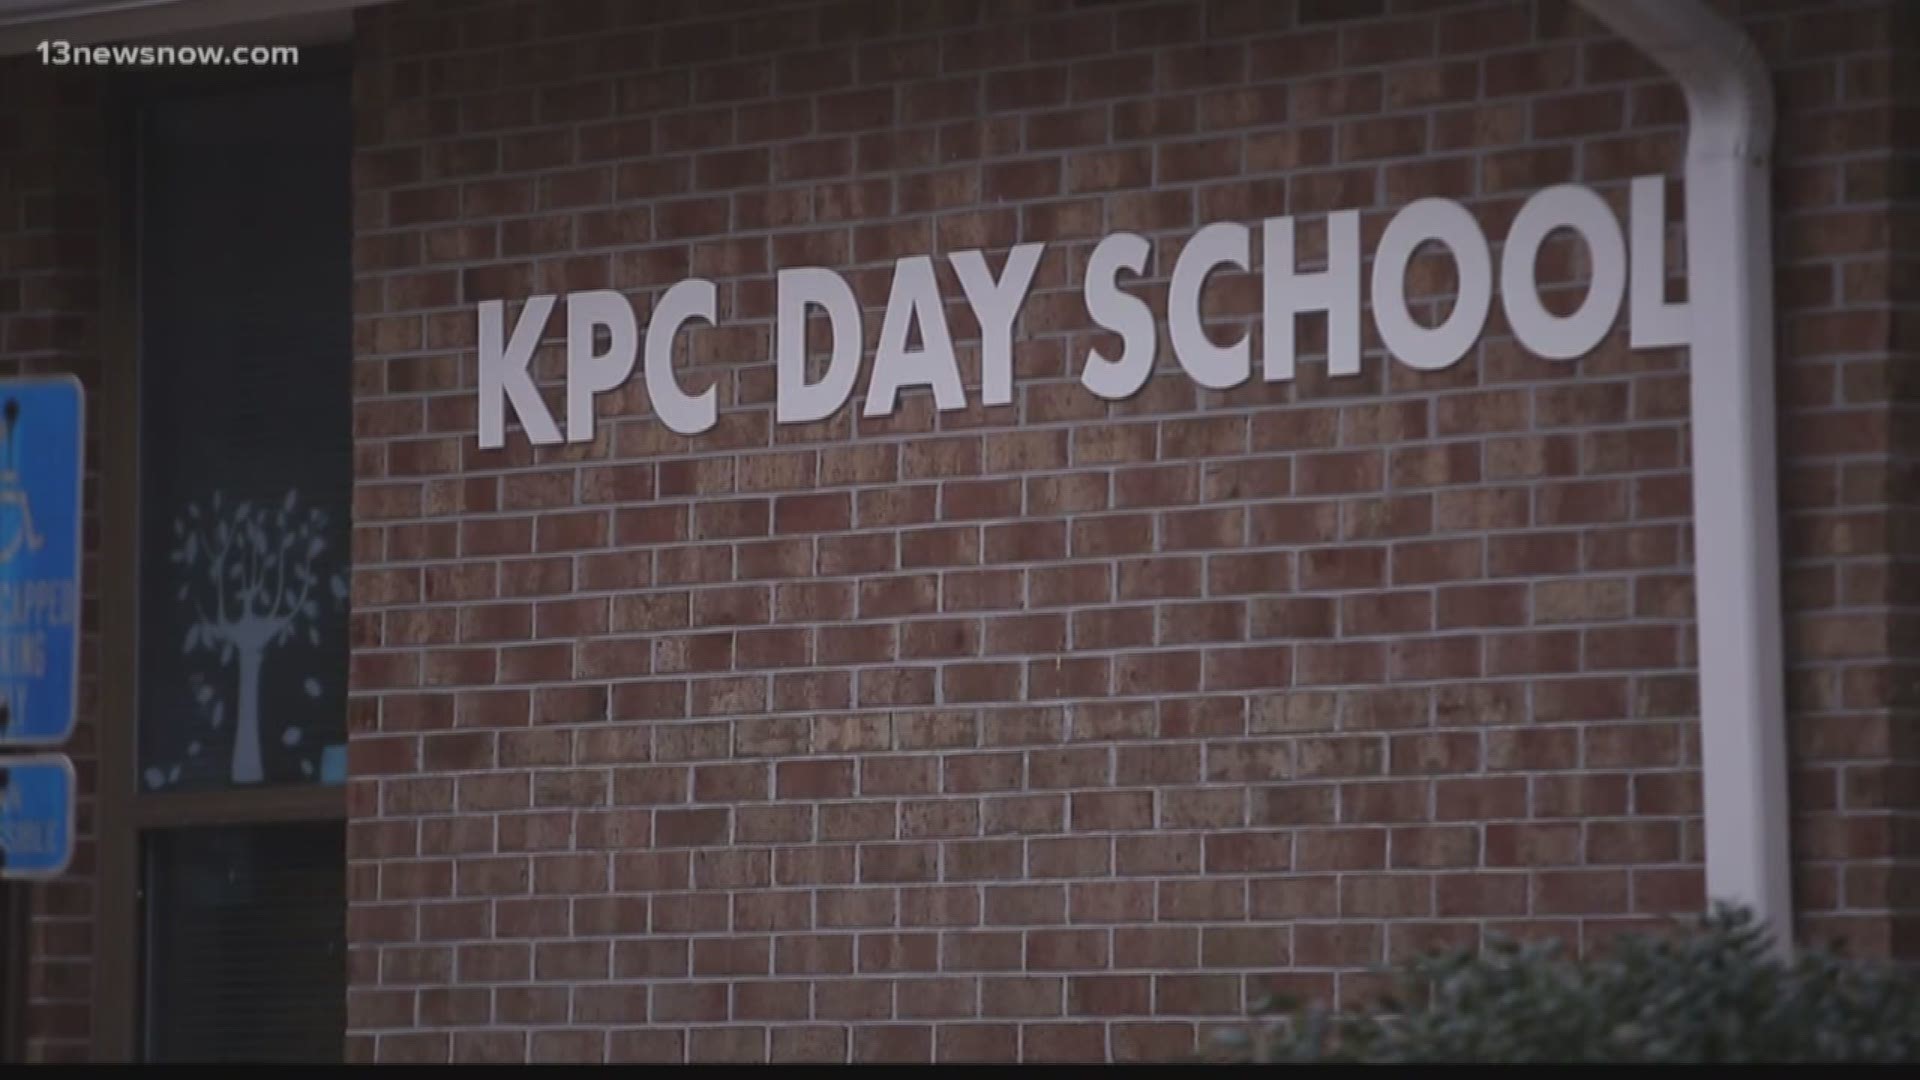 Parents are fighting to keep KPC Day School open after the church announced the school would close after this upcoming summer.